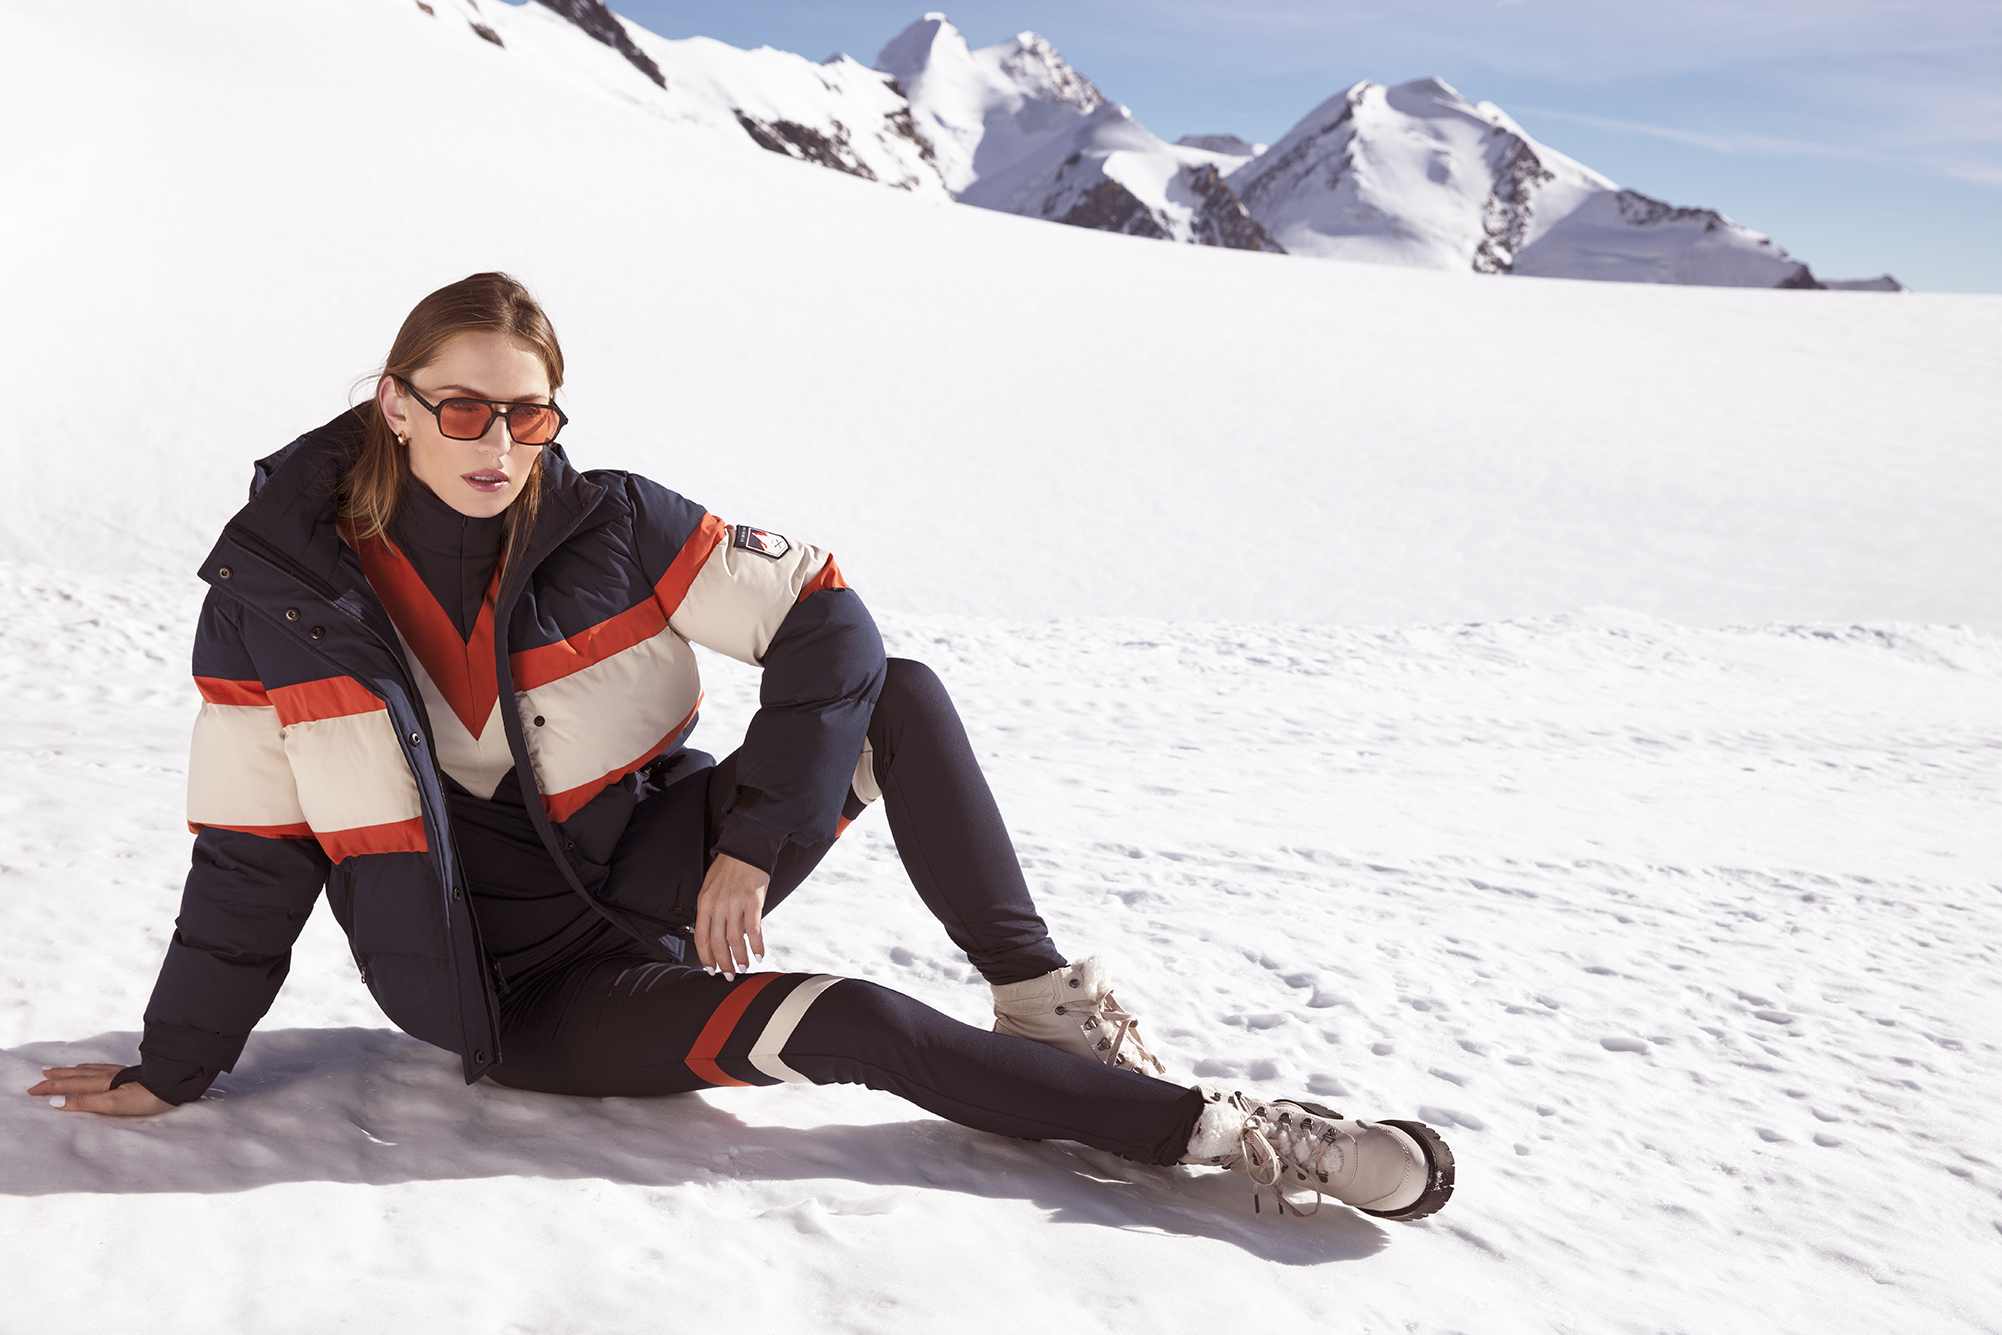 Why The Ski Capsule from By Malina is the ultimate ski collection you need for winter 21/22. 53